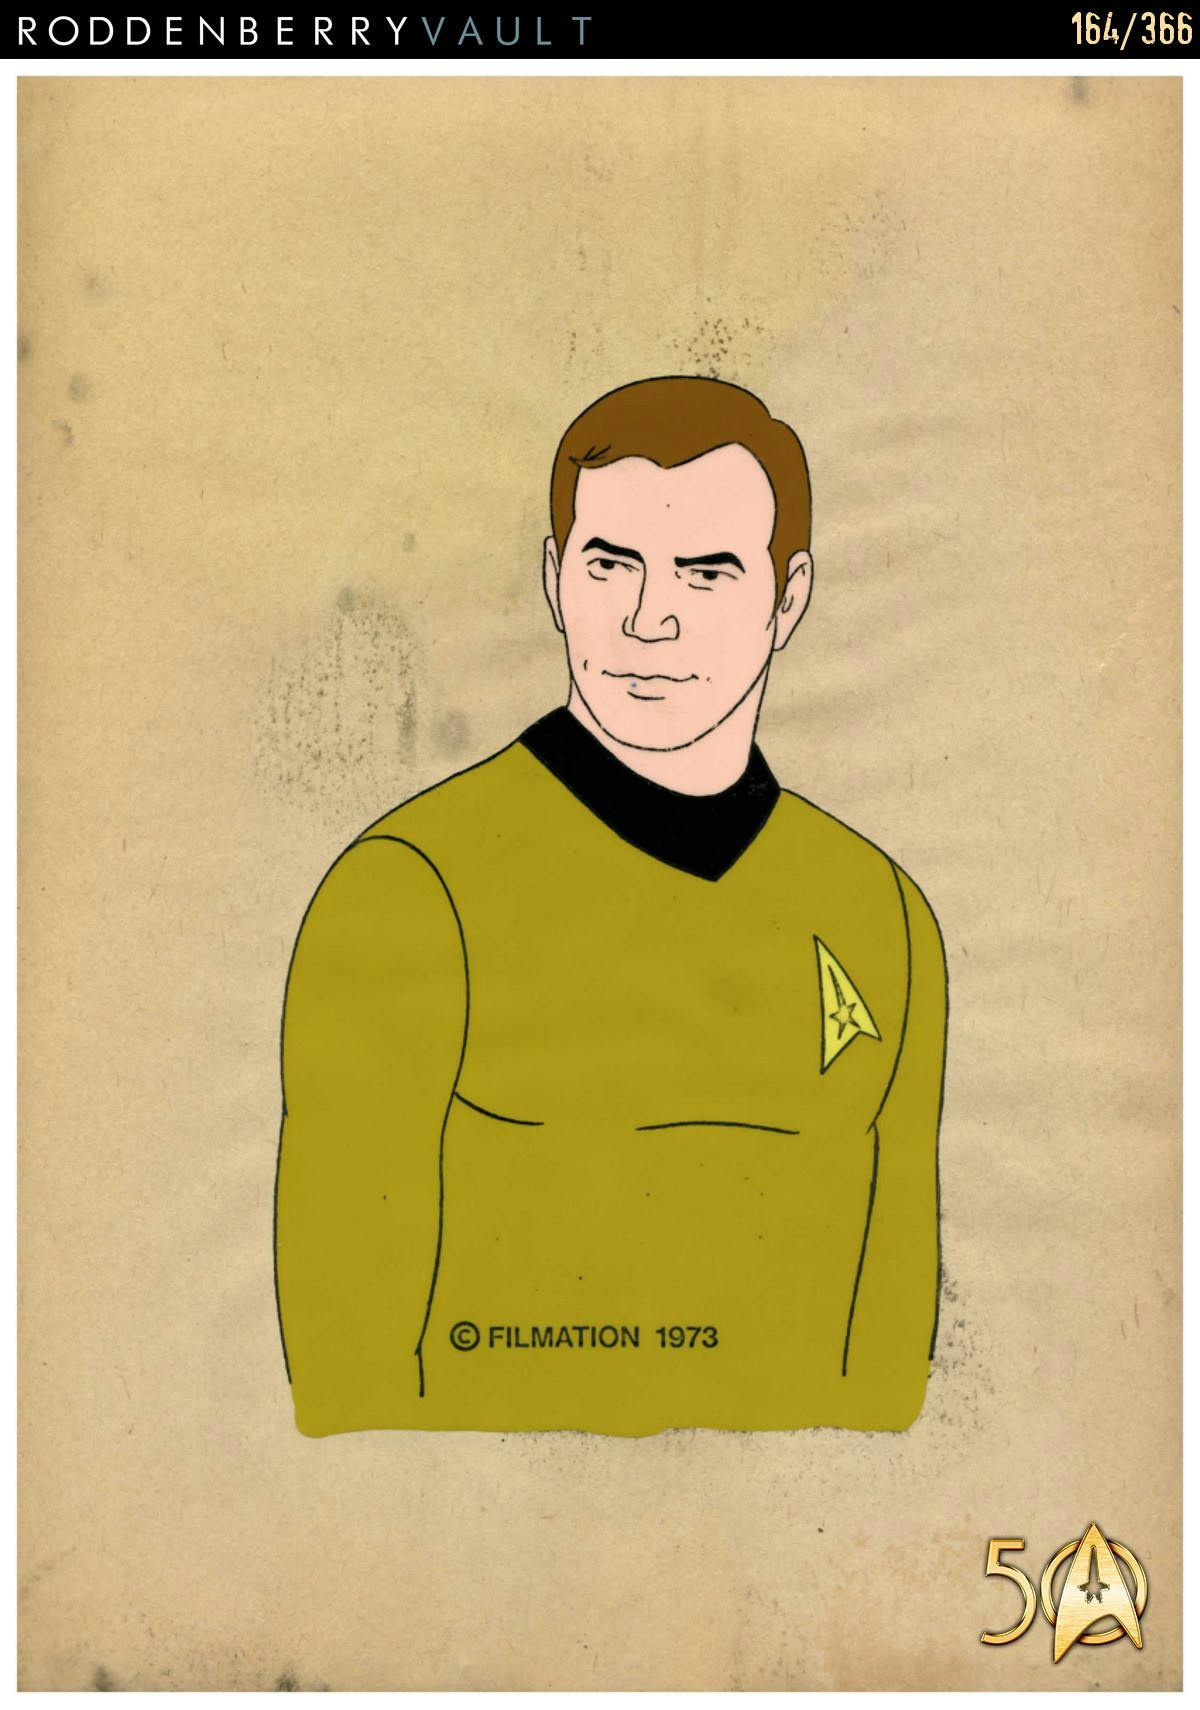 From the Roddenberry 366 Vault - The Animated Series - Filmation promotional art of Captain Kirk